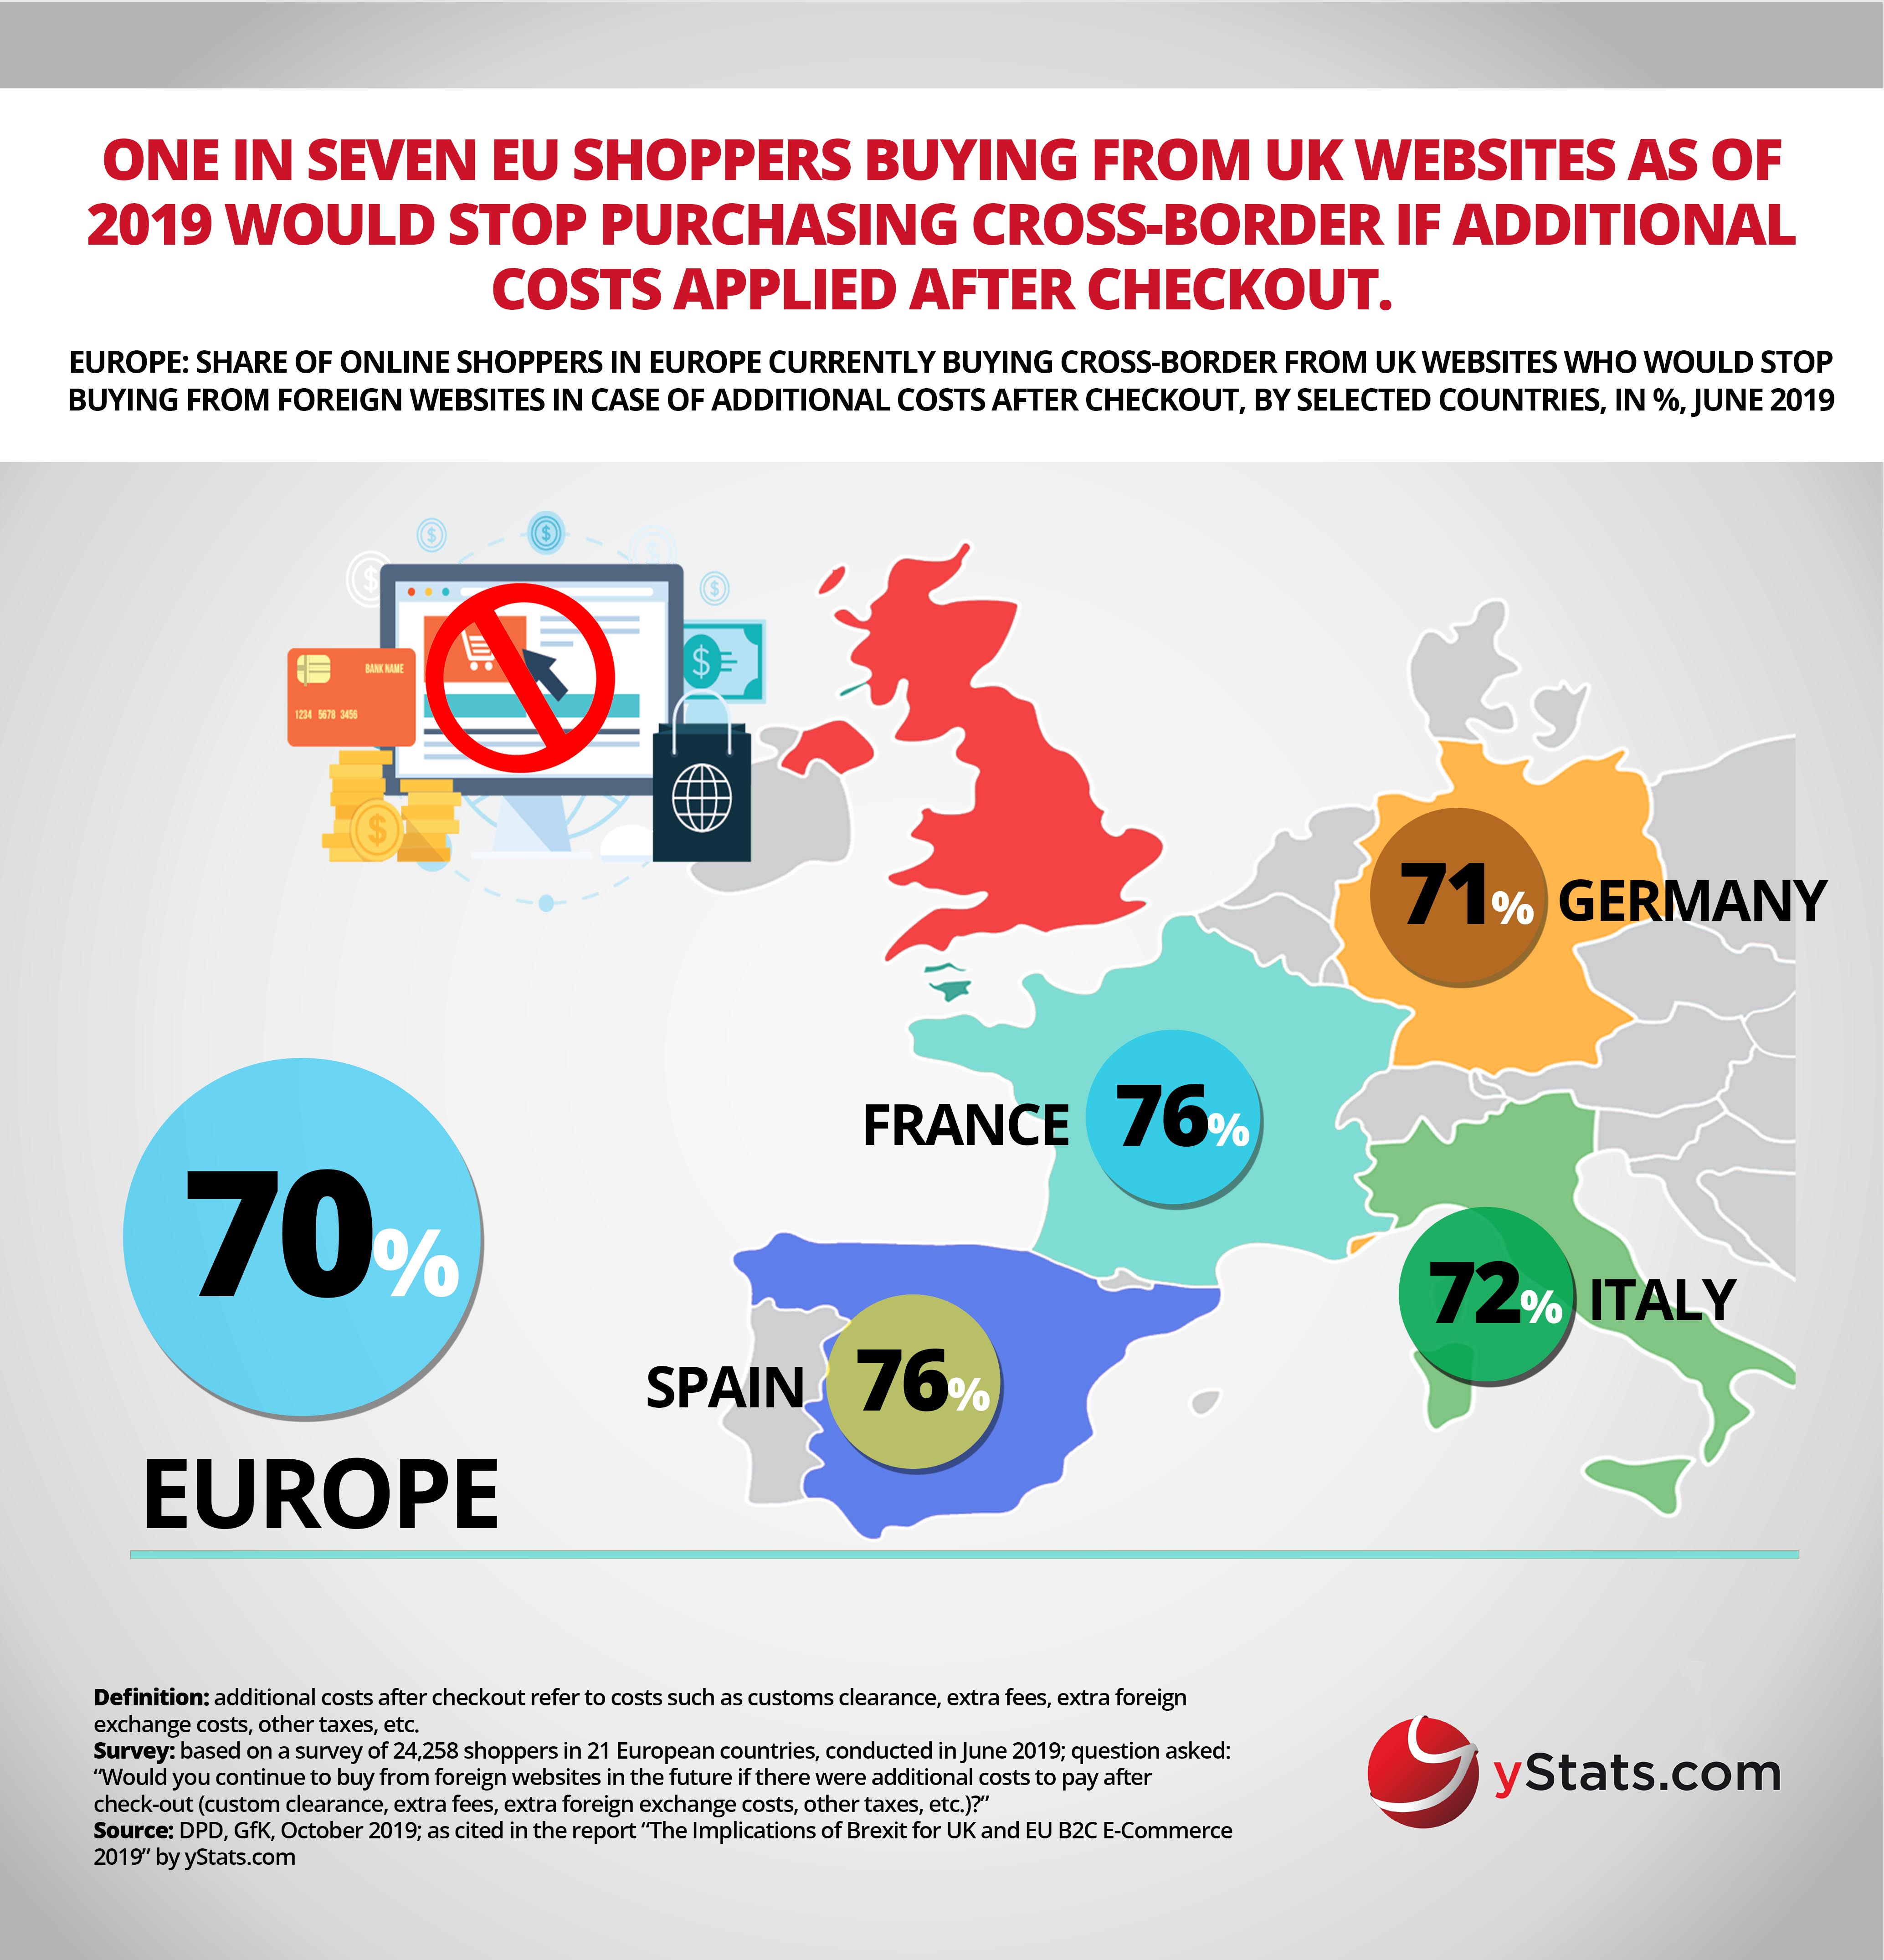 Infographic: The Implications of Brexit for UK and EU B2C E-Commerce 2019